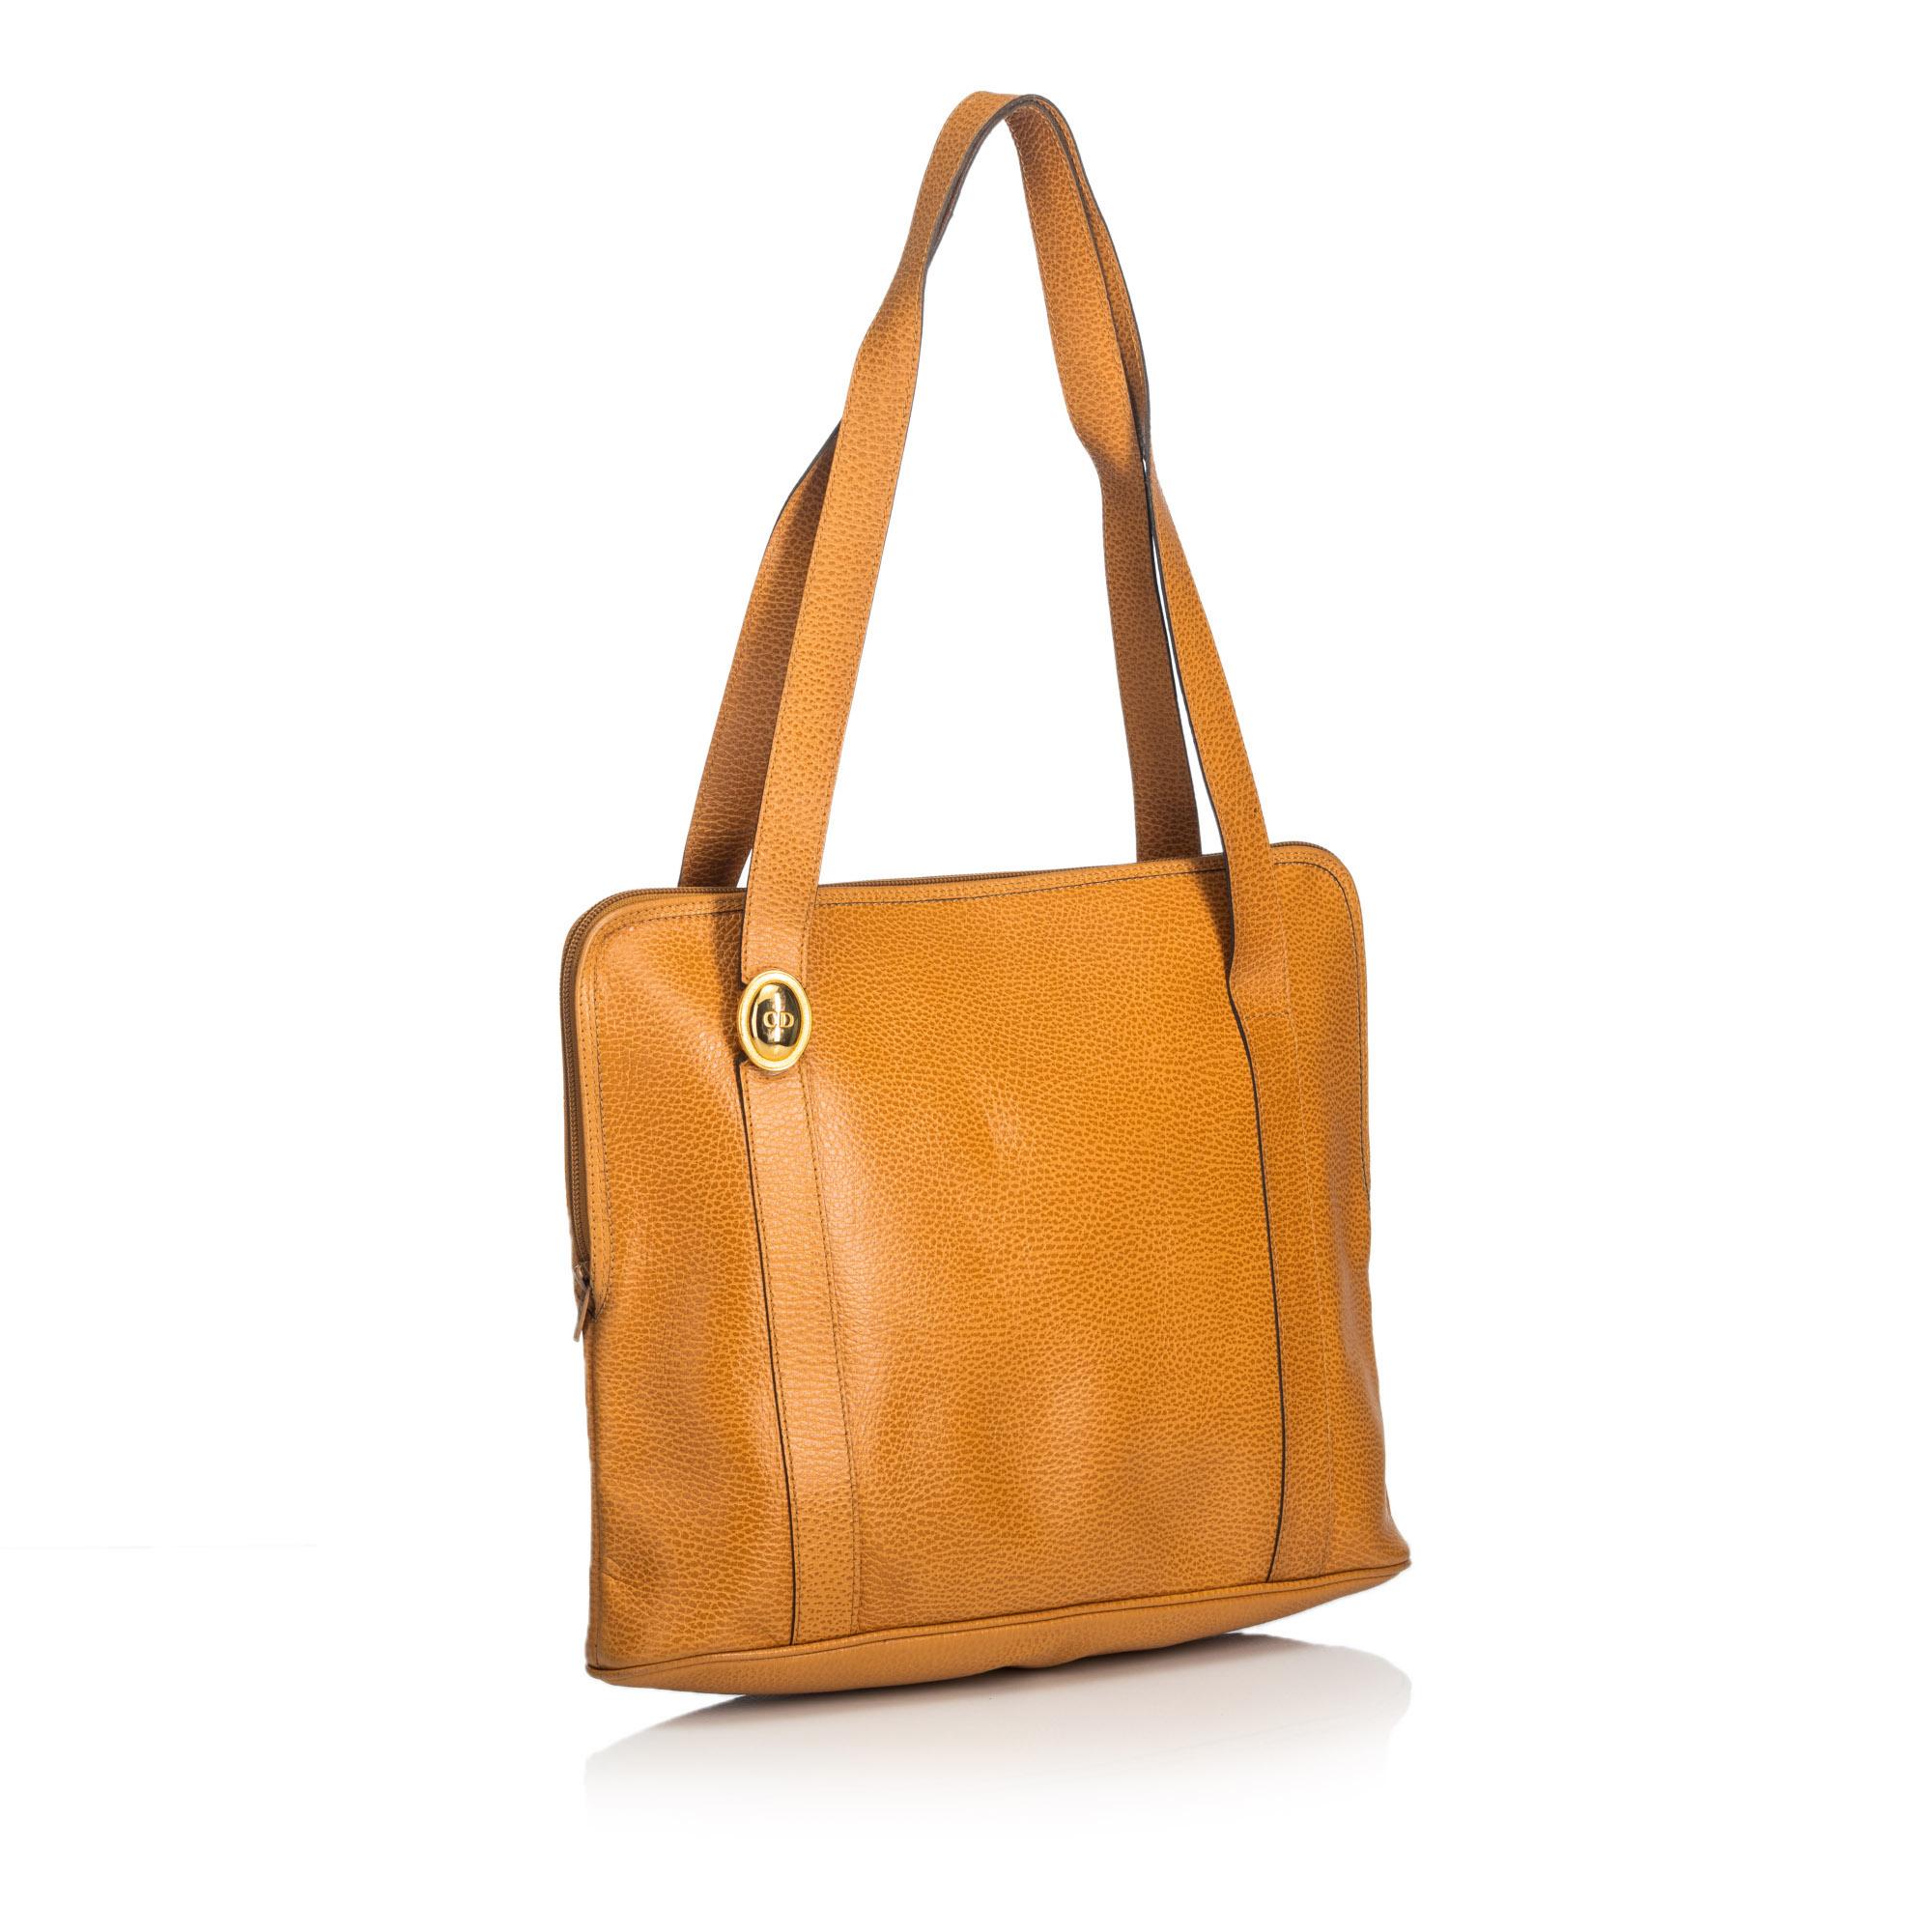 This tote bag features a leather body, flat leather handles, top zip closure, and an interior zip pocket. It carries as B+ condition rating.

Inclusions: 
This item does not come with inclusions.

Dimensions:
Length: 27.00 cm
Width: 36.00 cm
Depth: